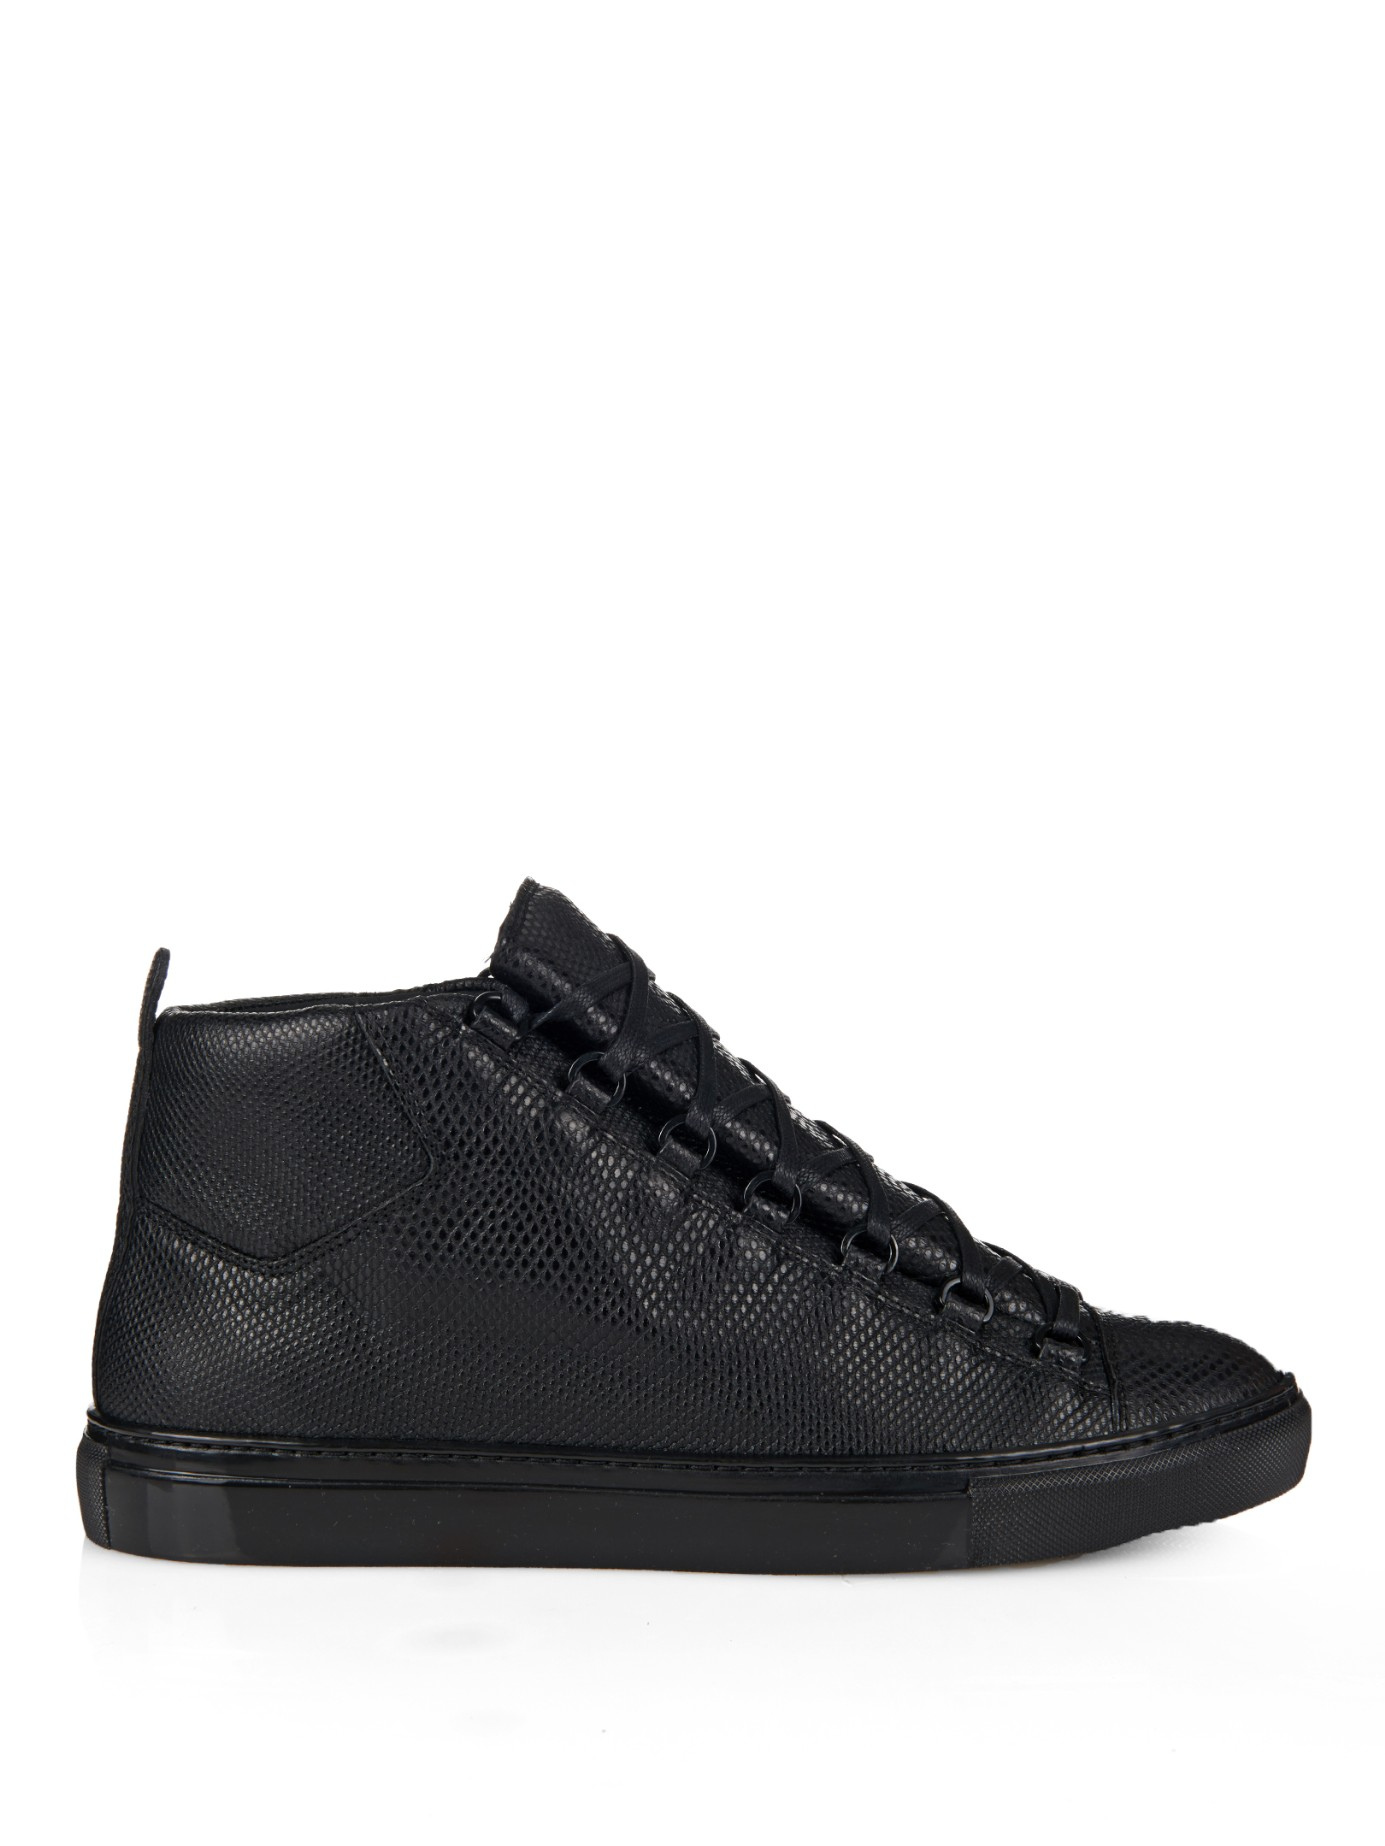 Lyst - Balenciaga Arena Water Snake High-top Trainers in Black for Men